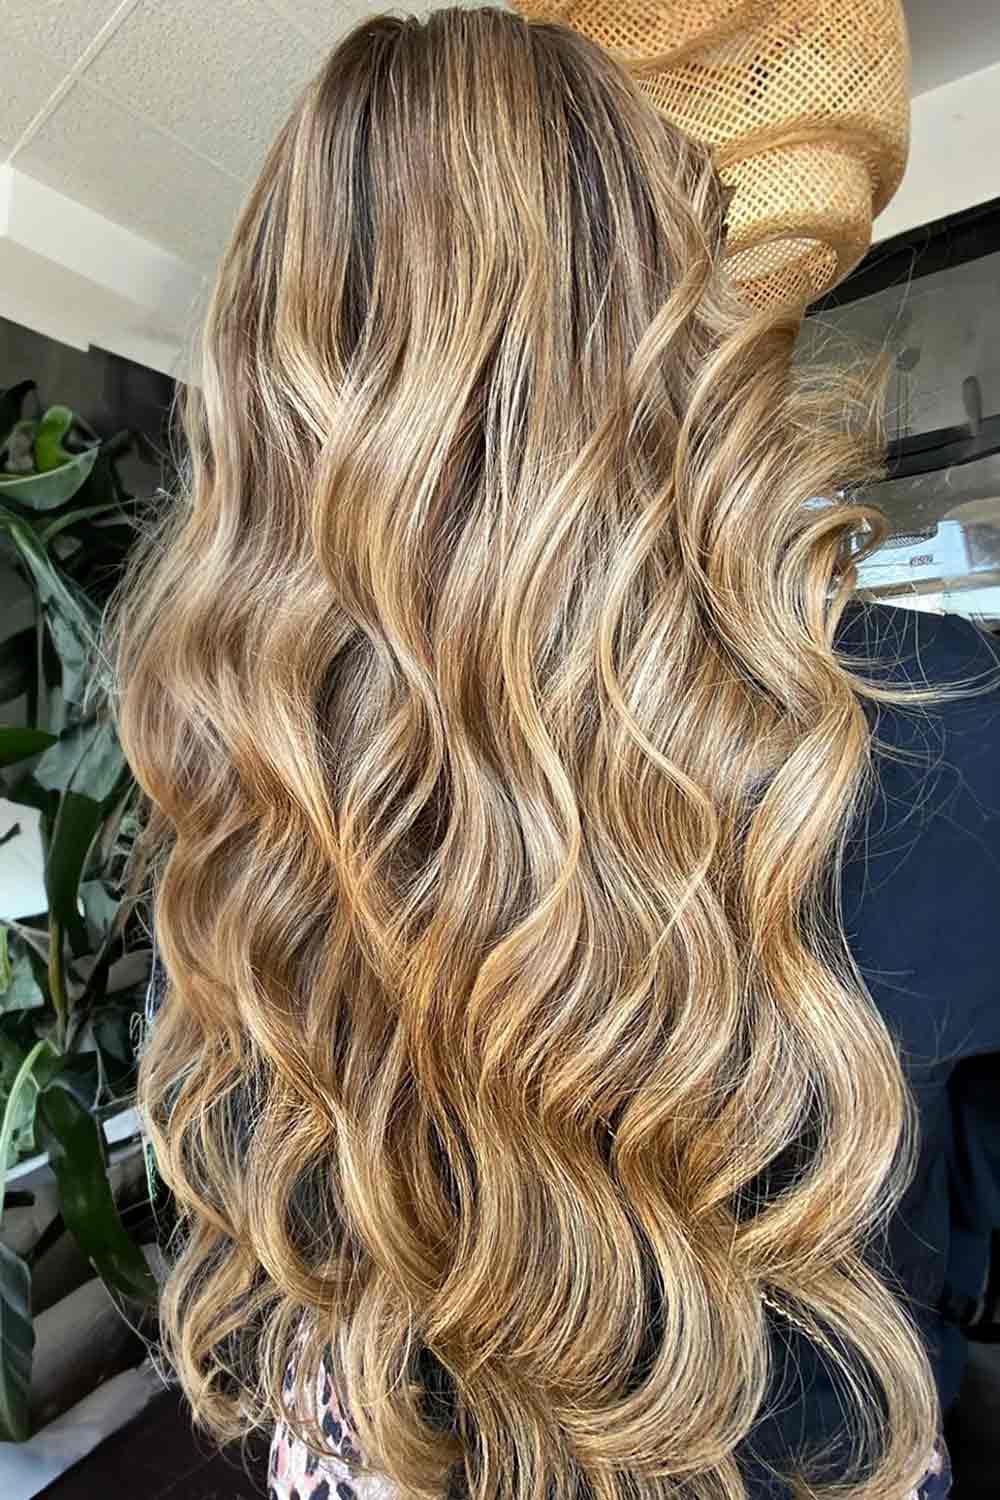 Wavy Natural Dirty Blonde Hairstyles #dirtyblondehair #dirtyblonde #blondehair #blonde